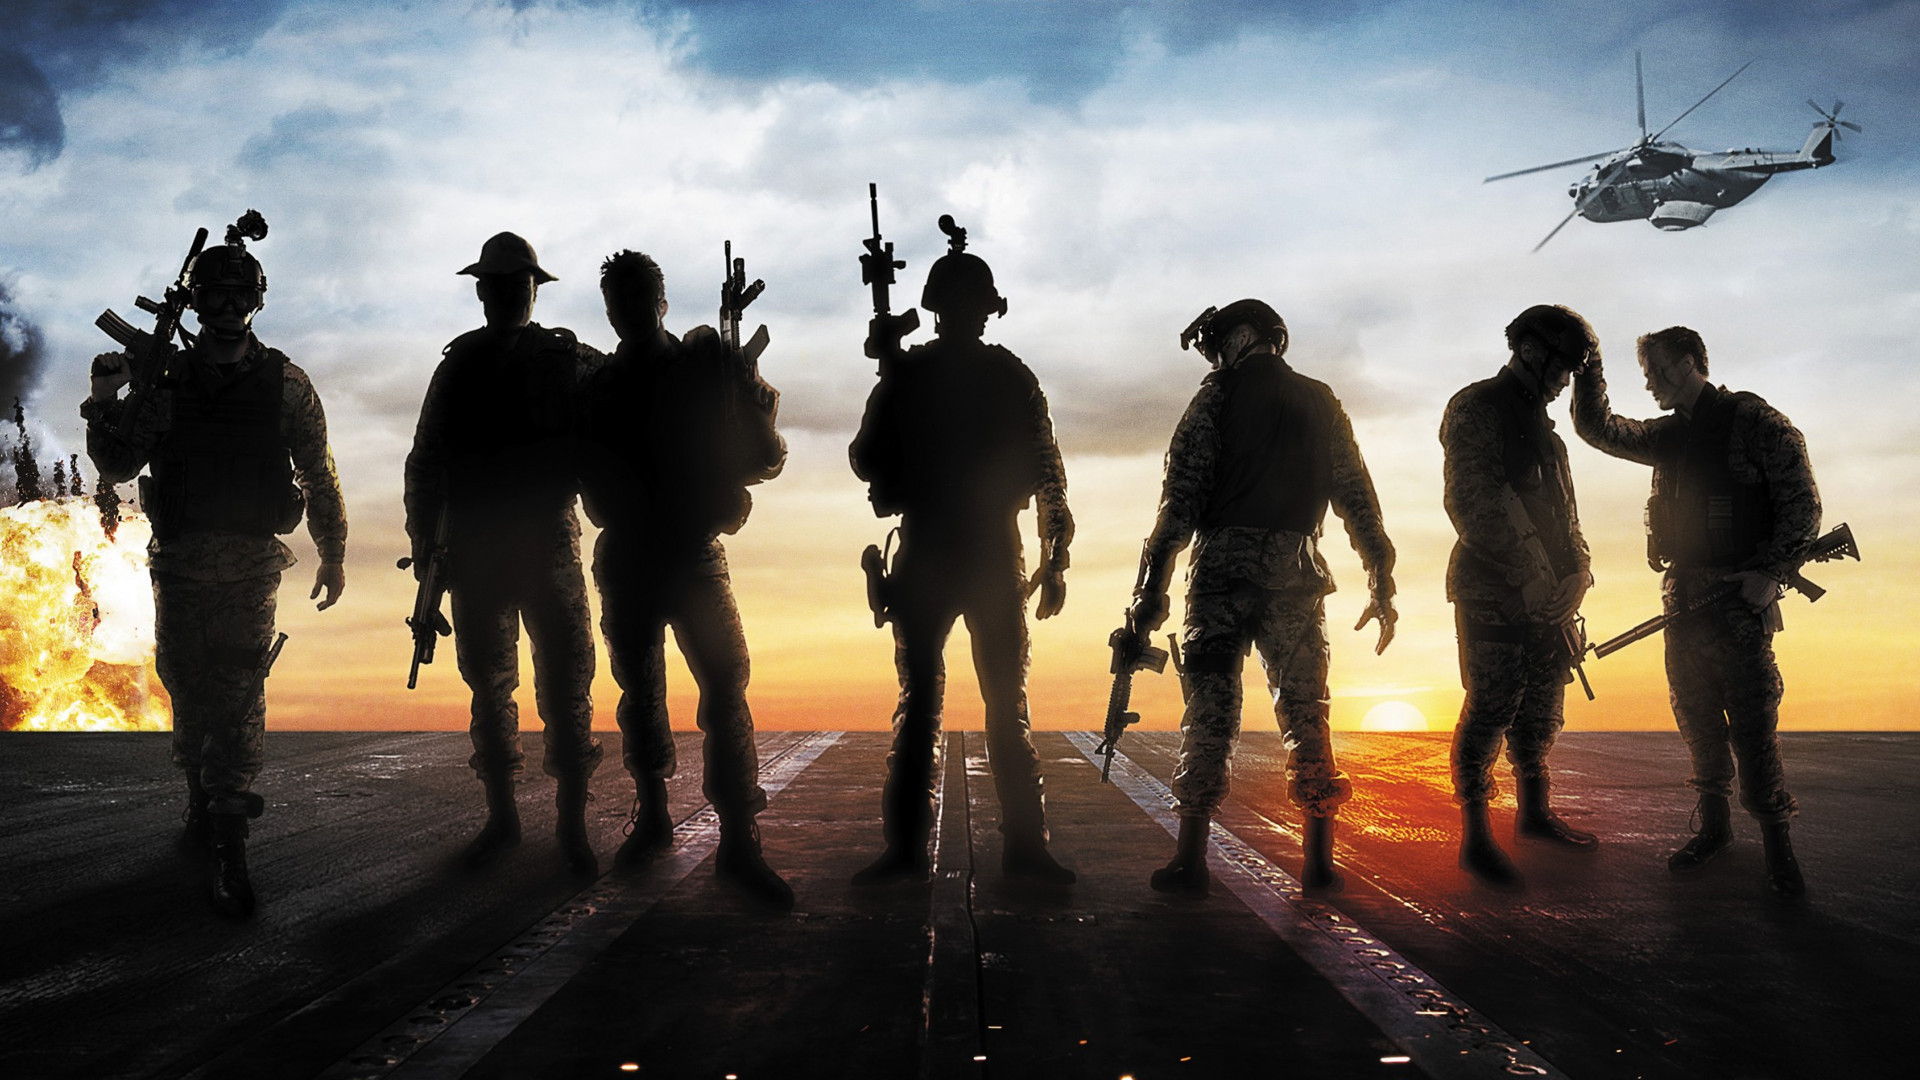 Movie Act Of Valor HD Wallpaper | Background Image